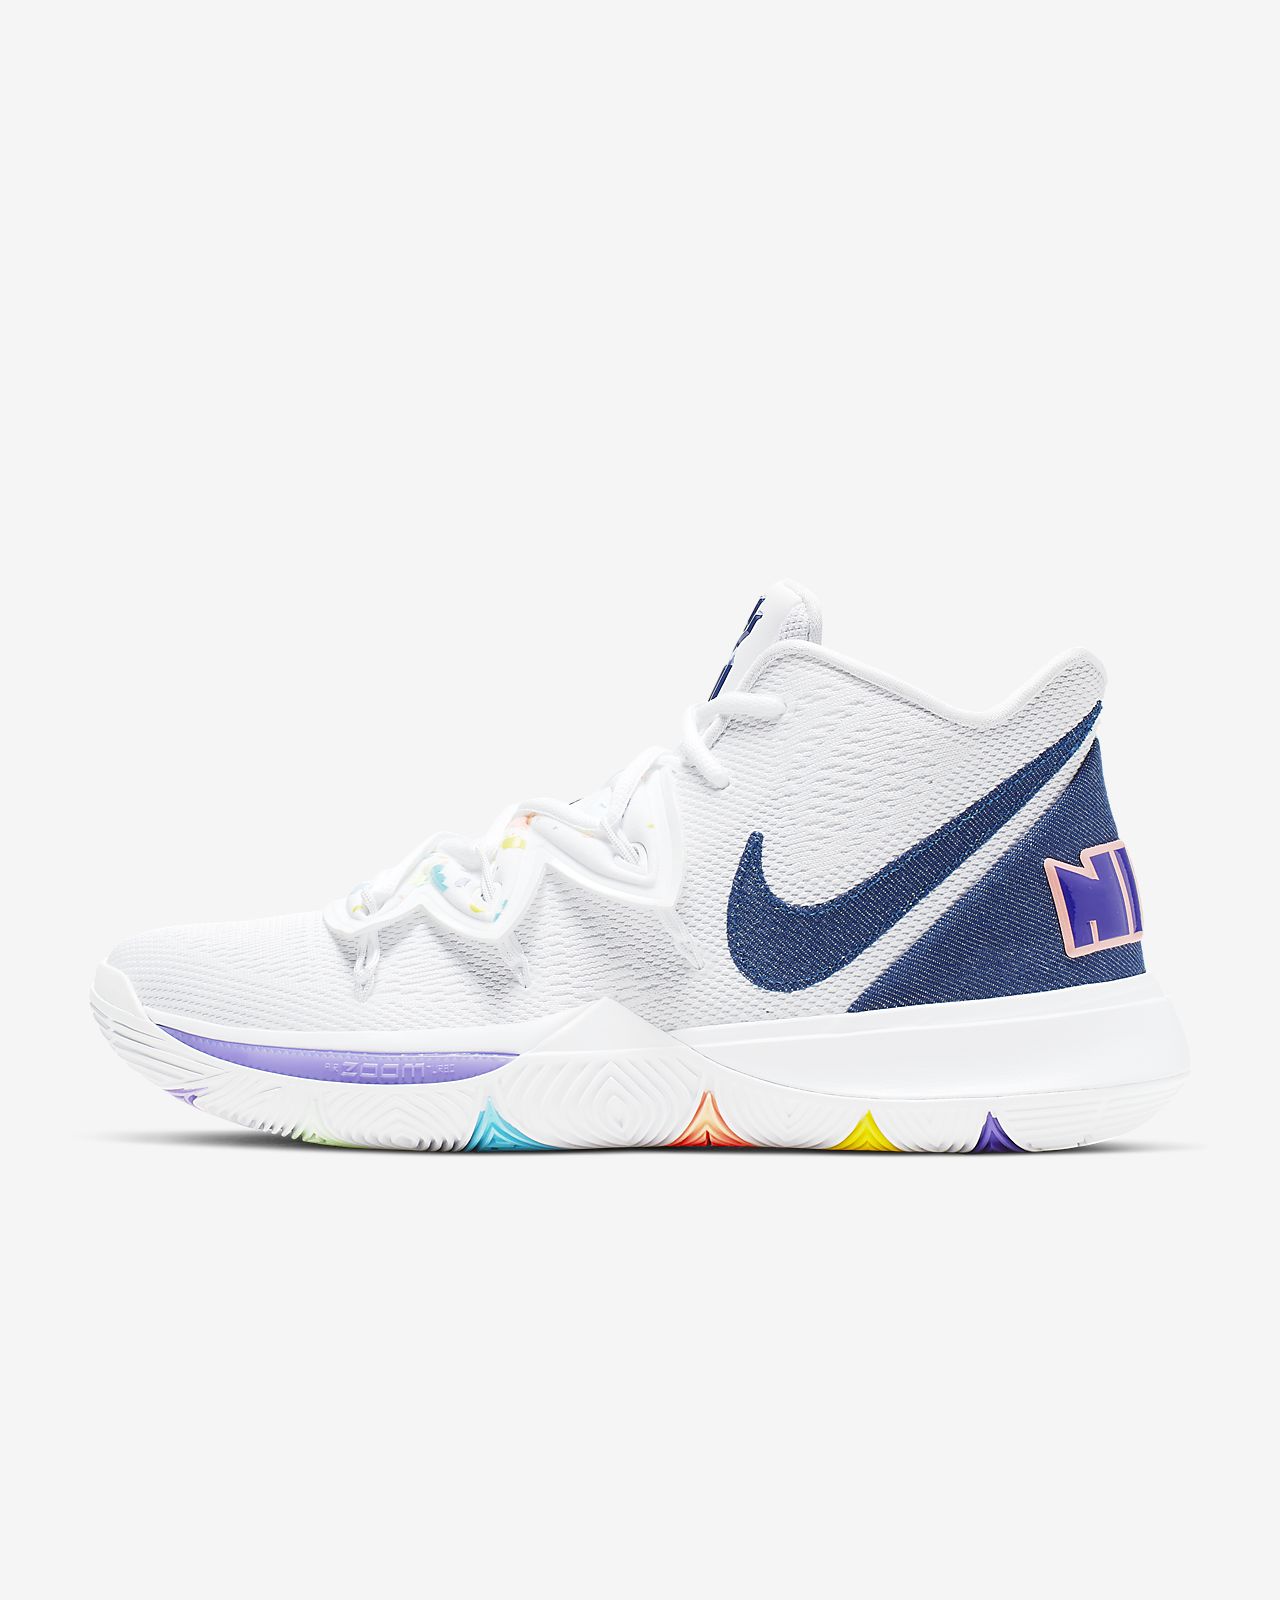 kyrie 5 shoes white